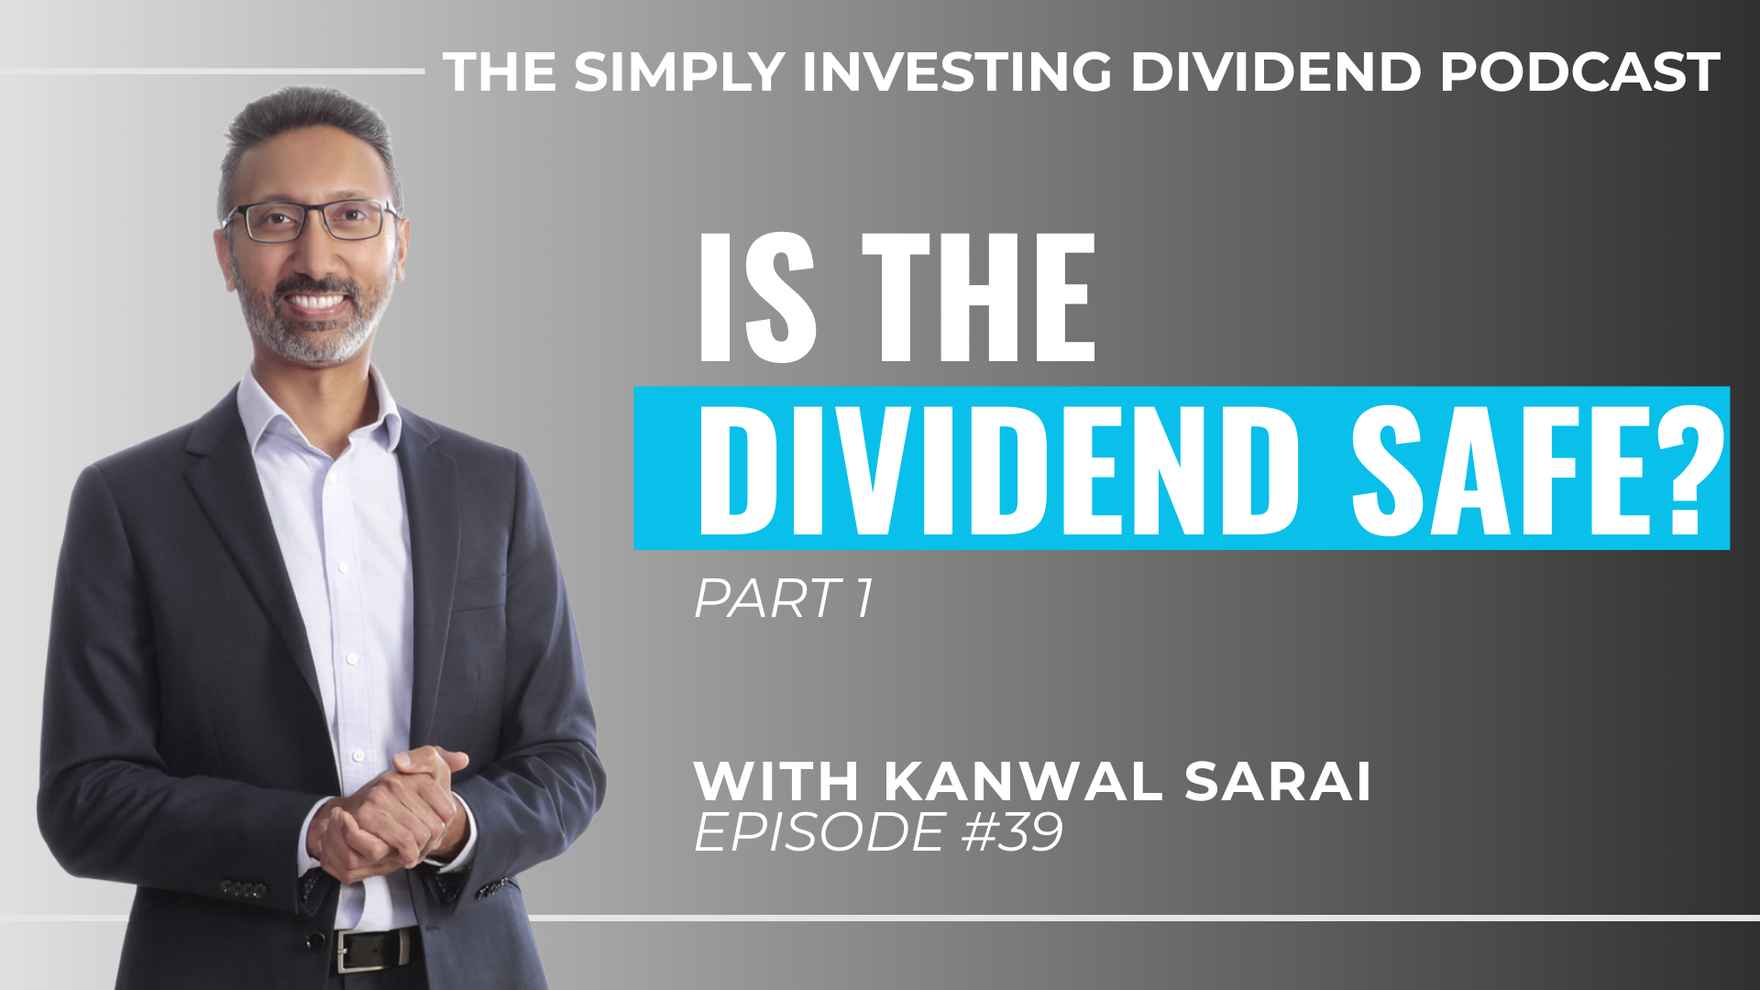 Simply Investing Dividend Podcast Episode 39 - How Do You Know If The Dividend is Safe